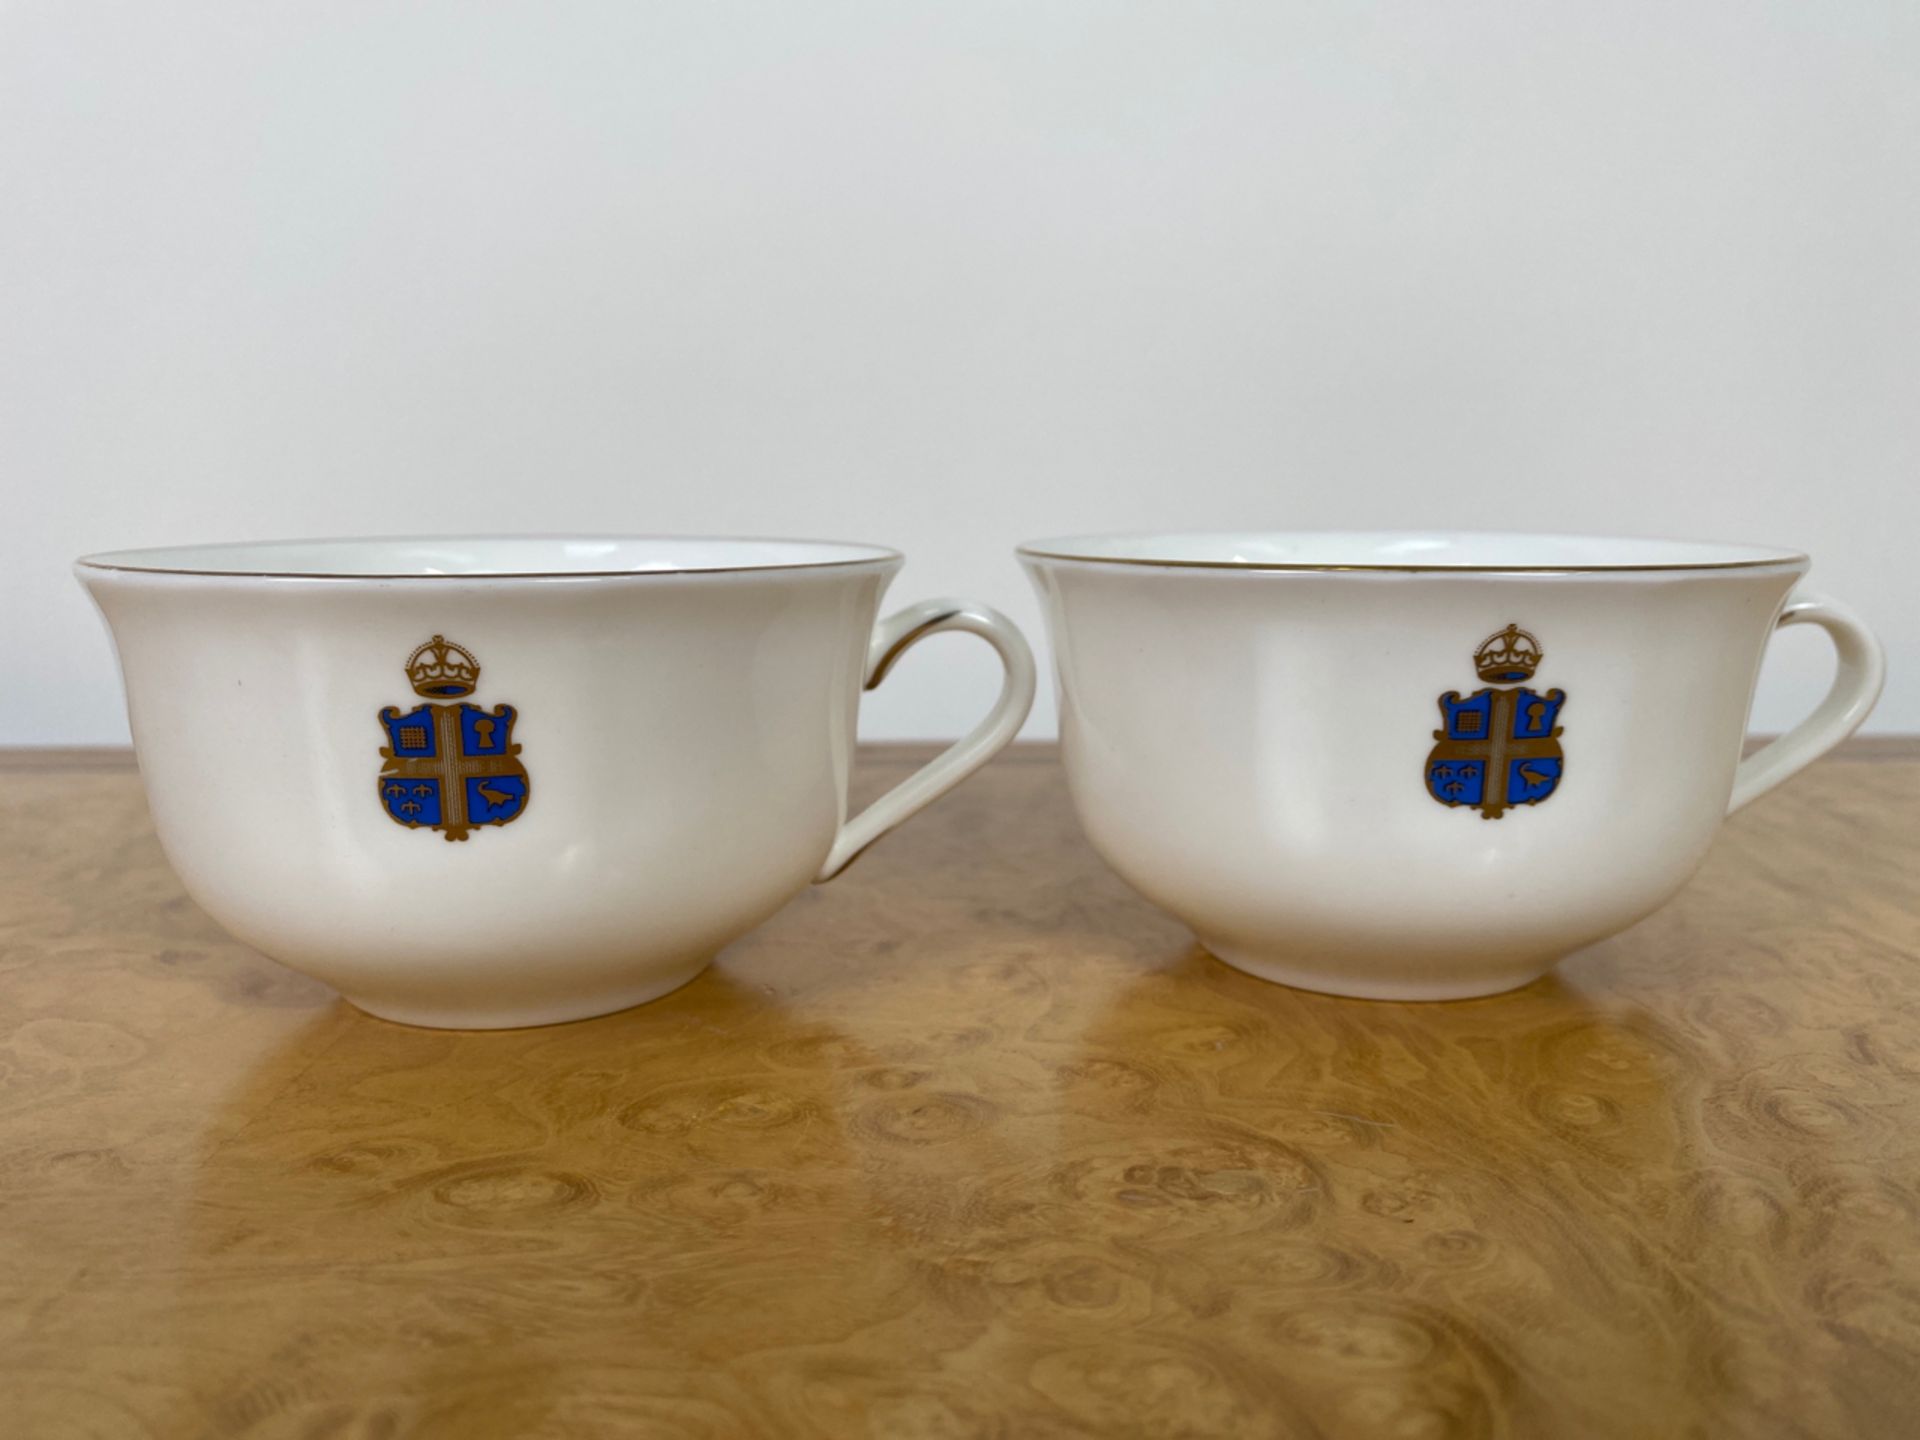 Set of Crested Crockery for Claridge's by Chommette 1884 - Image 13 of 38